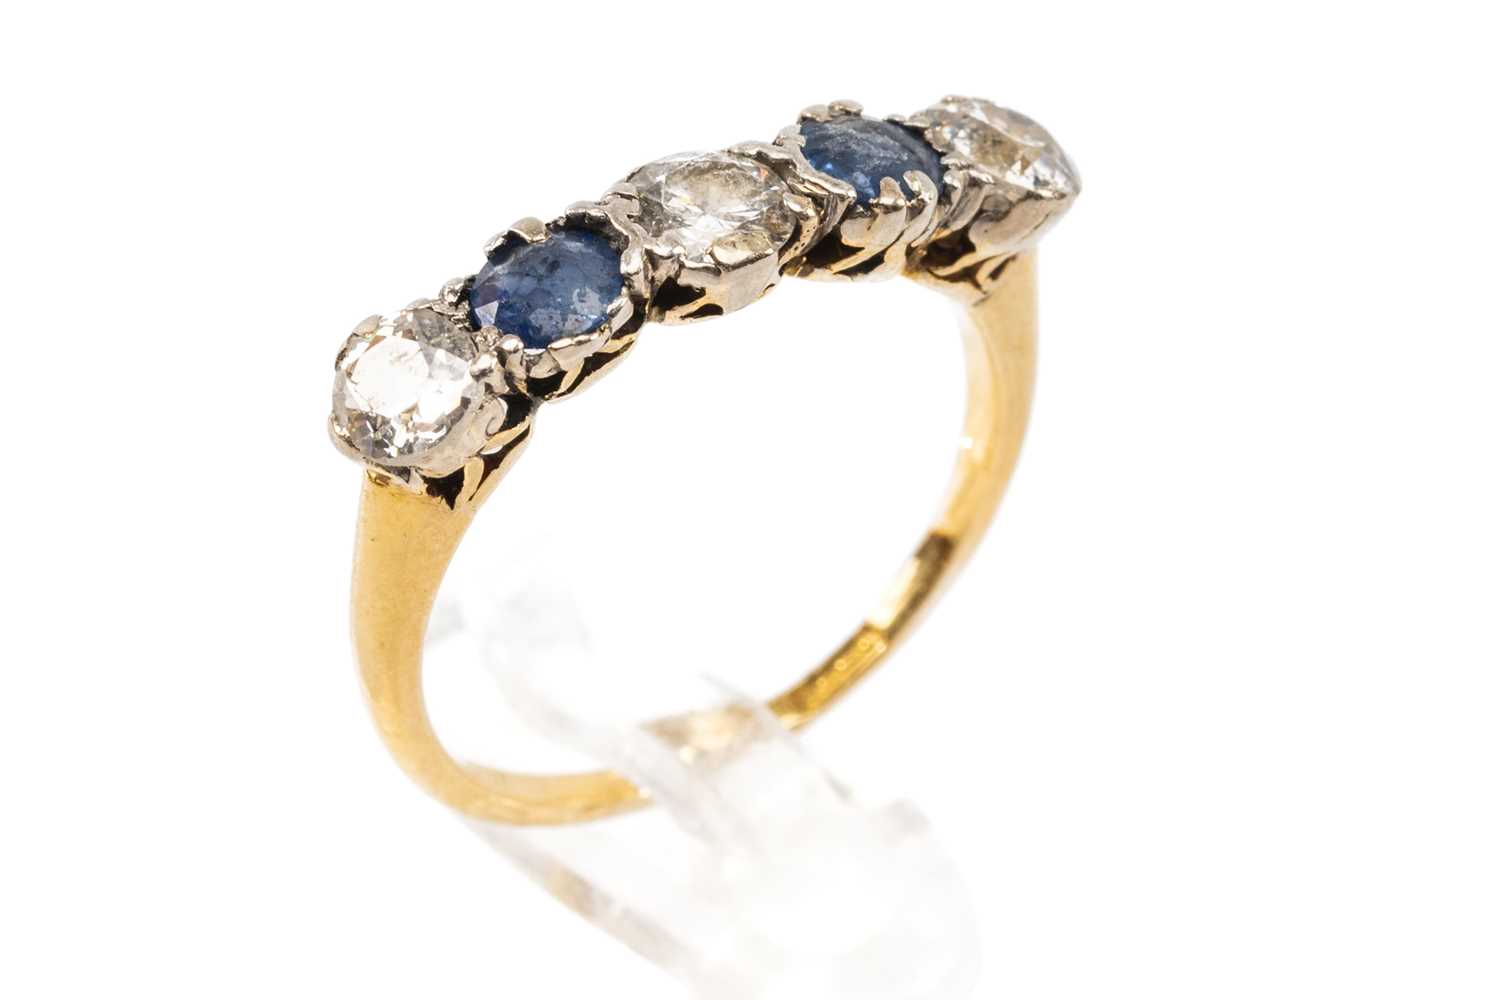 18CT GOLD FIVE STONE DIAMOND & SAPPHIRE RING, ring size M 1/2, 2.7gms Provenance: private collection